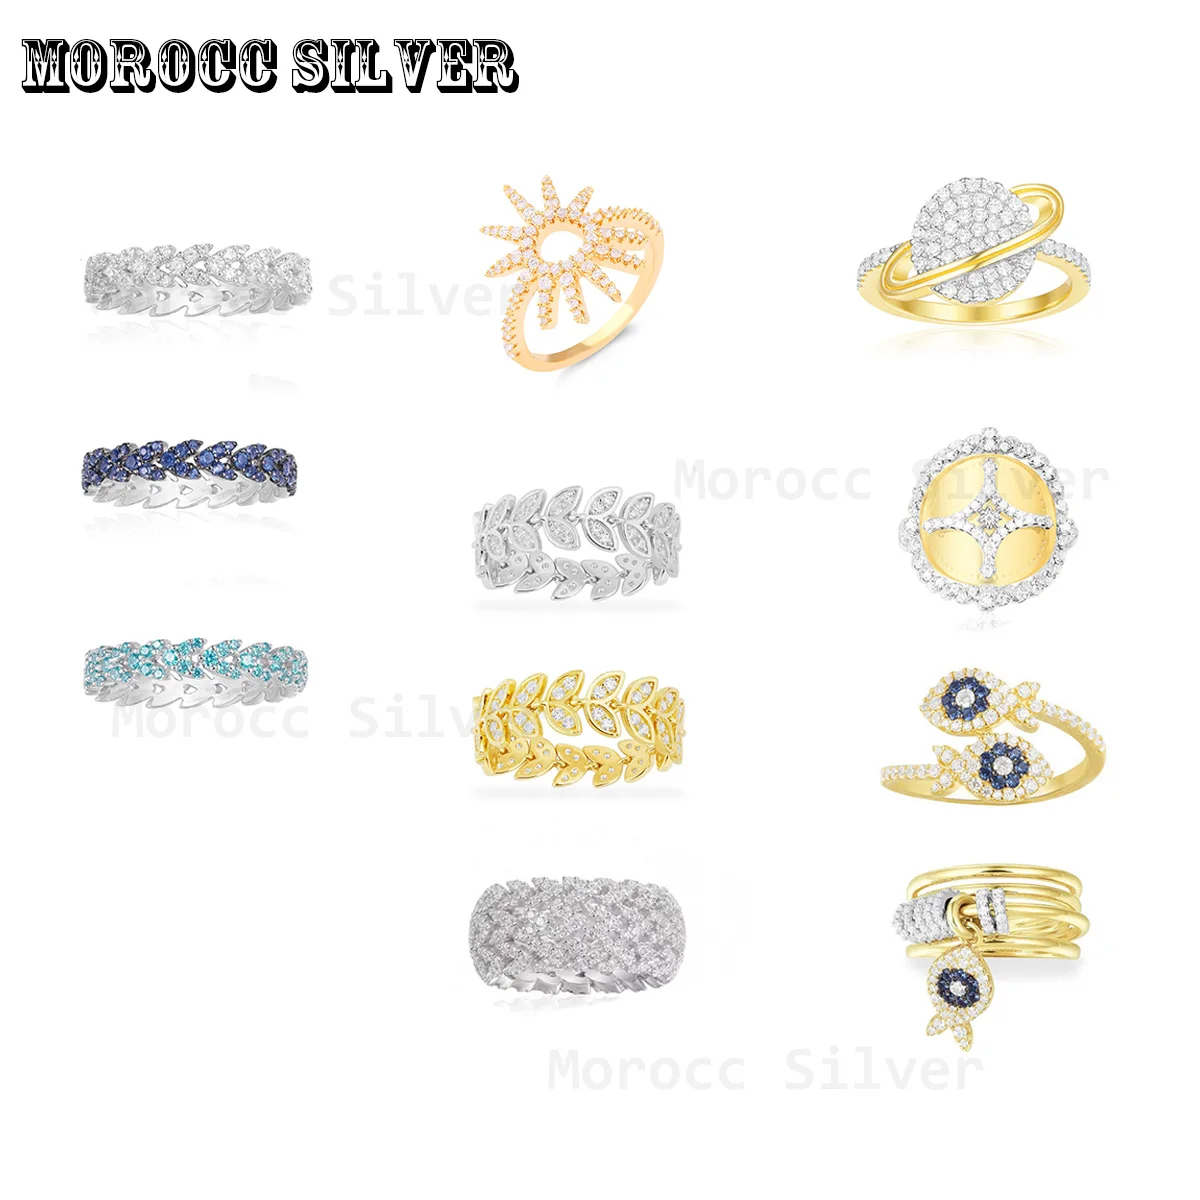 

S925 Sterling Silver Jewelry 1:1 Copy, Exquisite High-Quality Fritillaria Shape, Crystal Inlaid Palm Leaf Female Ring